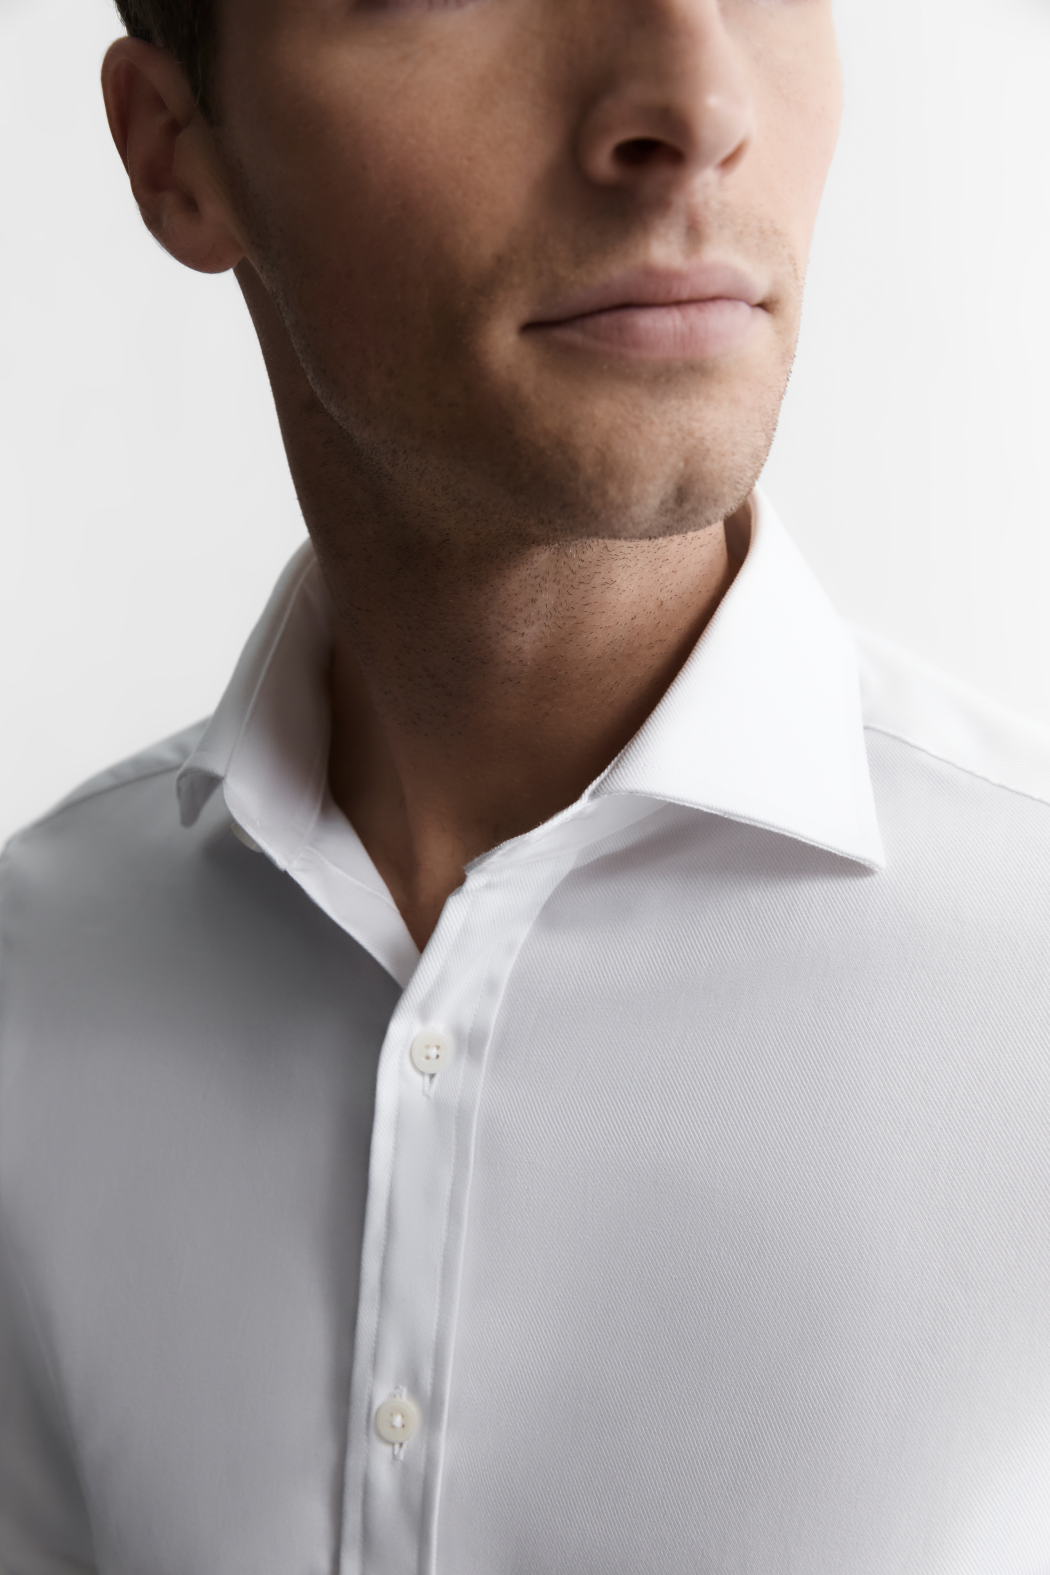 Image 3 of Easy To Iron White Plain Twill Stretch Regular Fit Single Cuff Classic Collar Shirt